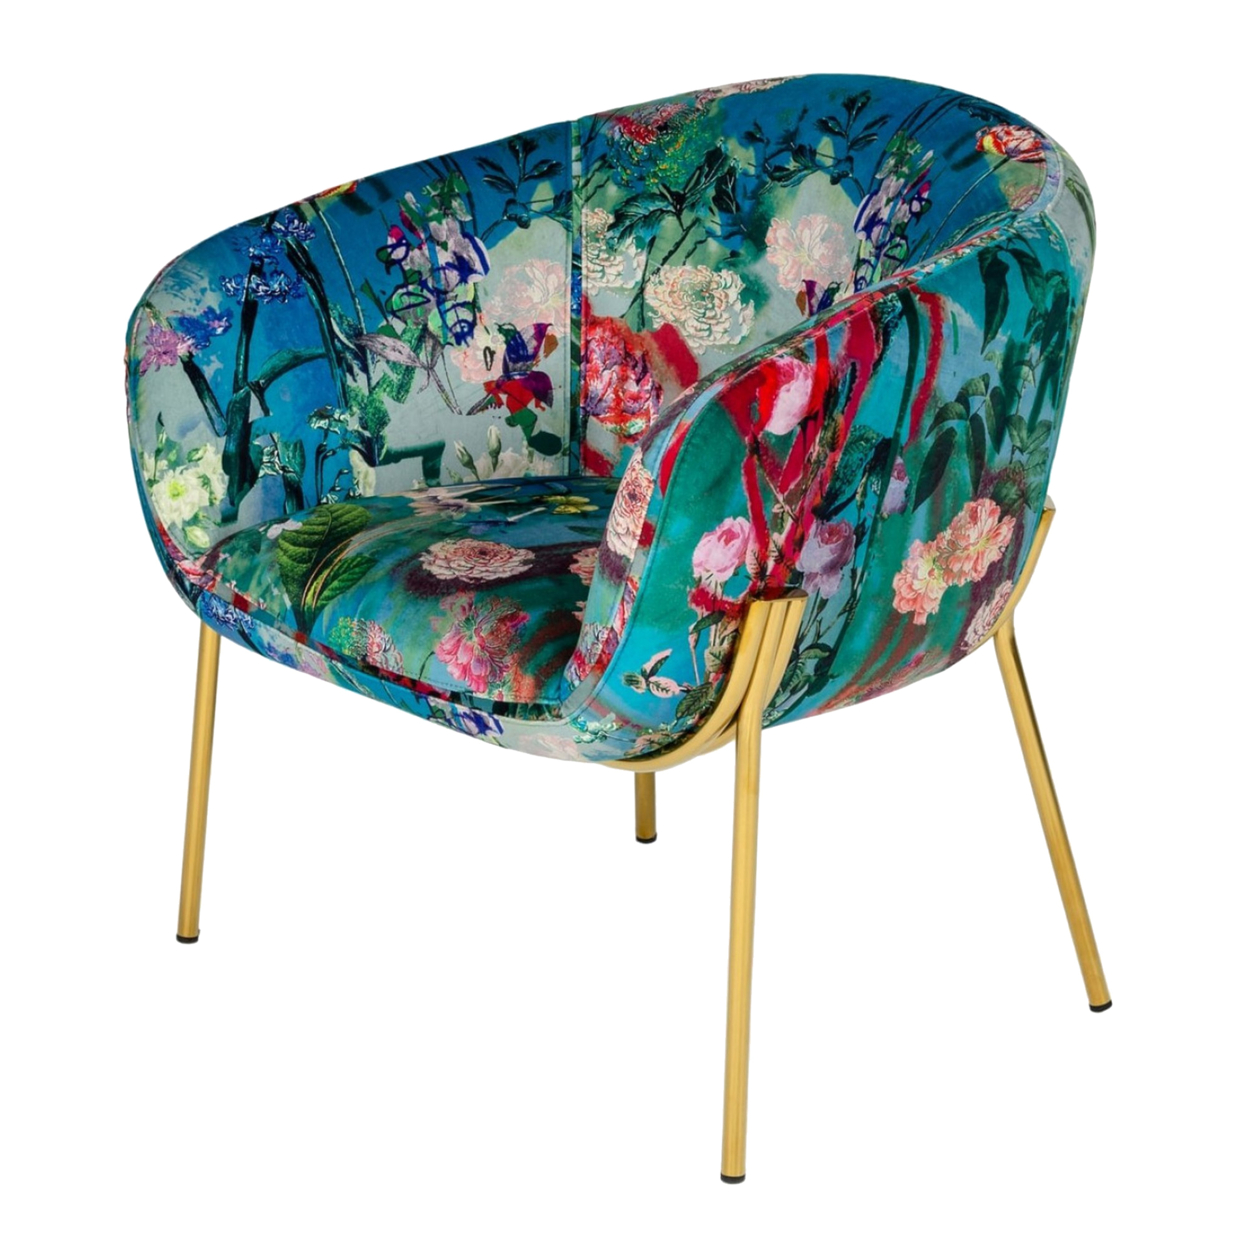 Curved Floral Pattern Fabric Accent Chair With Metal Legs, Blue And Gold- Saltoro Sherpi